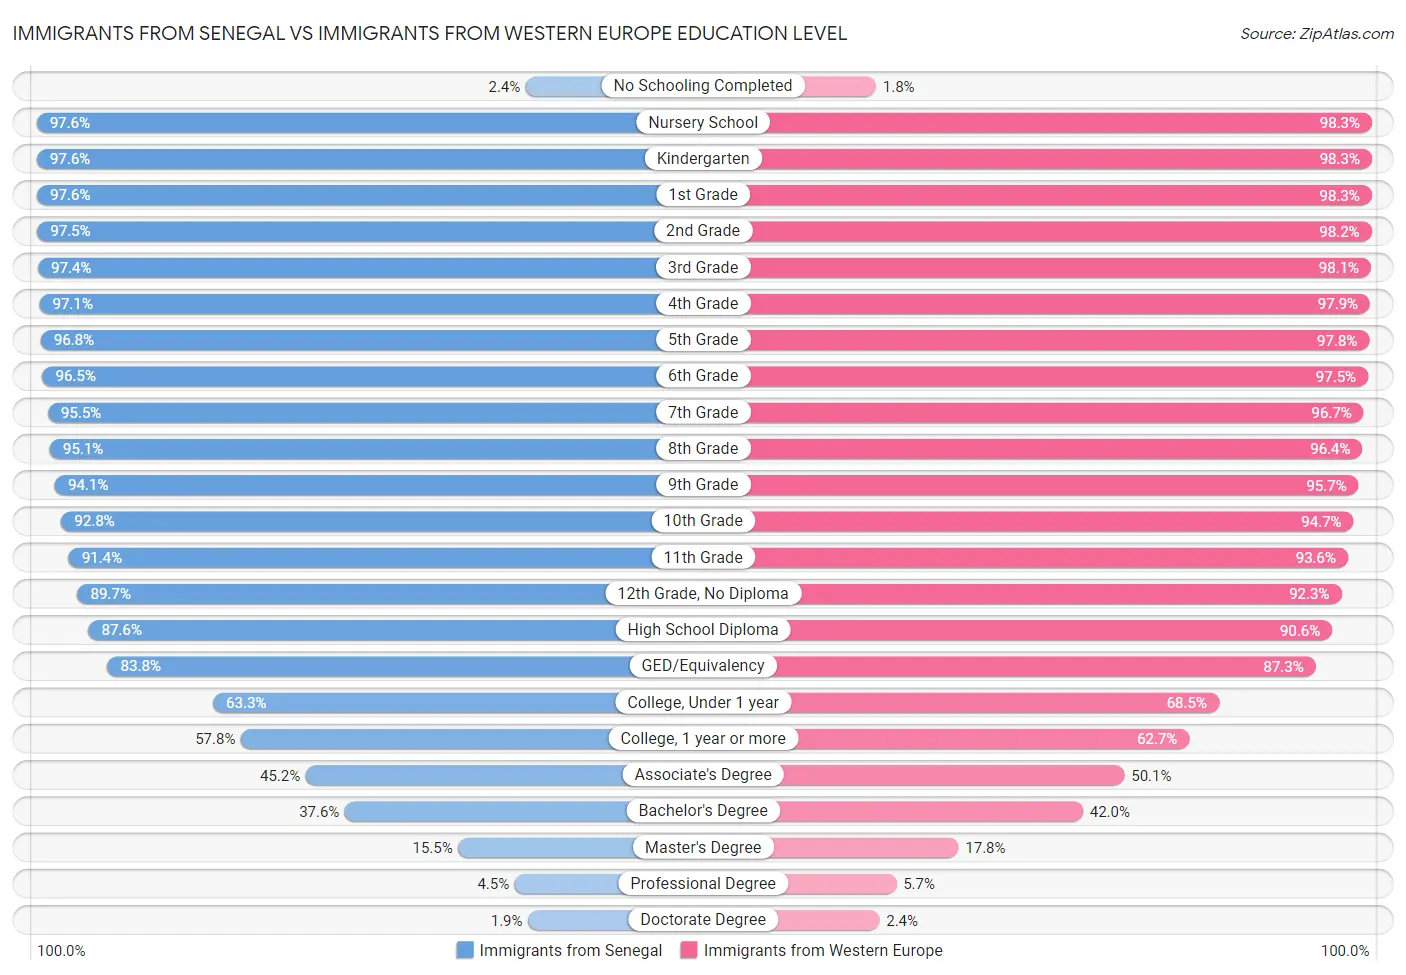 Immigrants from Senegal vs Immigrants from Western Europe Education Level